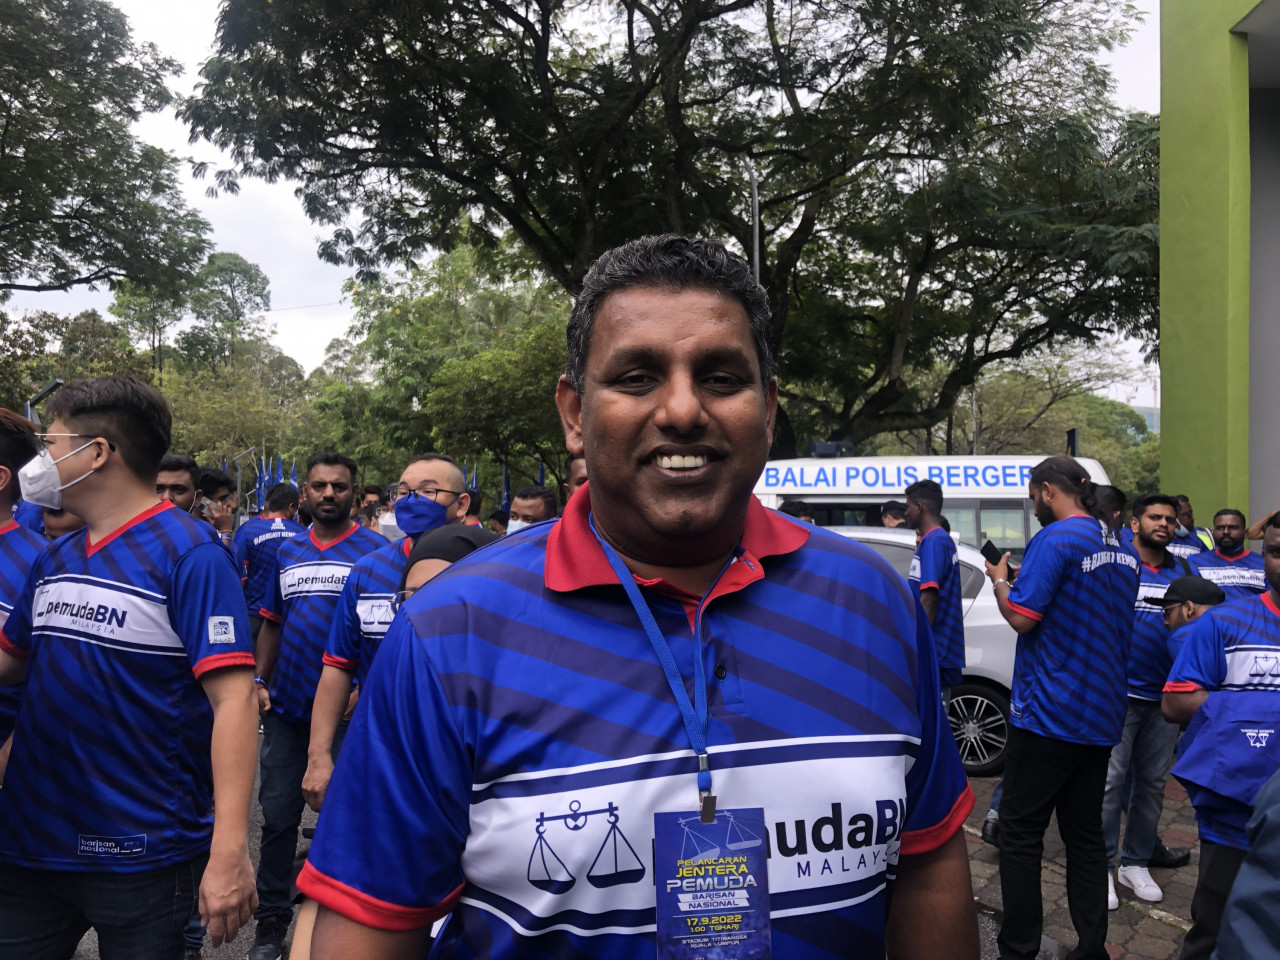 Barisan Nasional should not be overconfident heading into the looming national polls due to its successes in the Johor and Melaka elections, says MIC Youth chief K. Raven Kumar. – HAKIM MAHARI/The Vibes pic, September 18, 2022